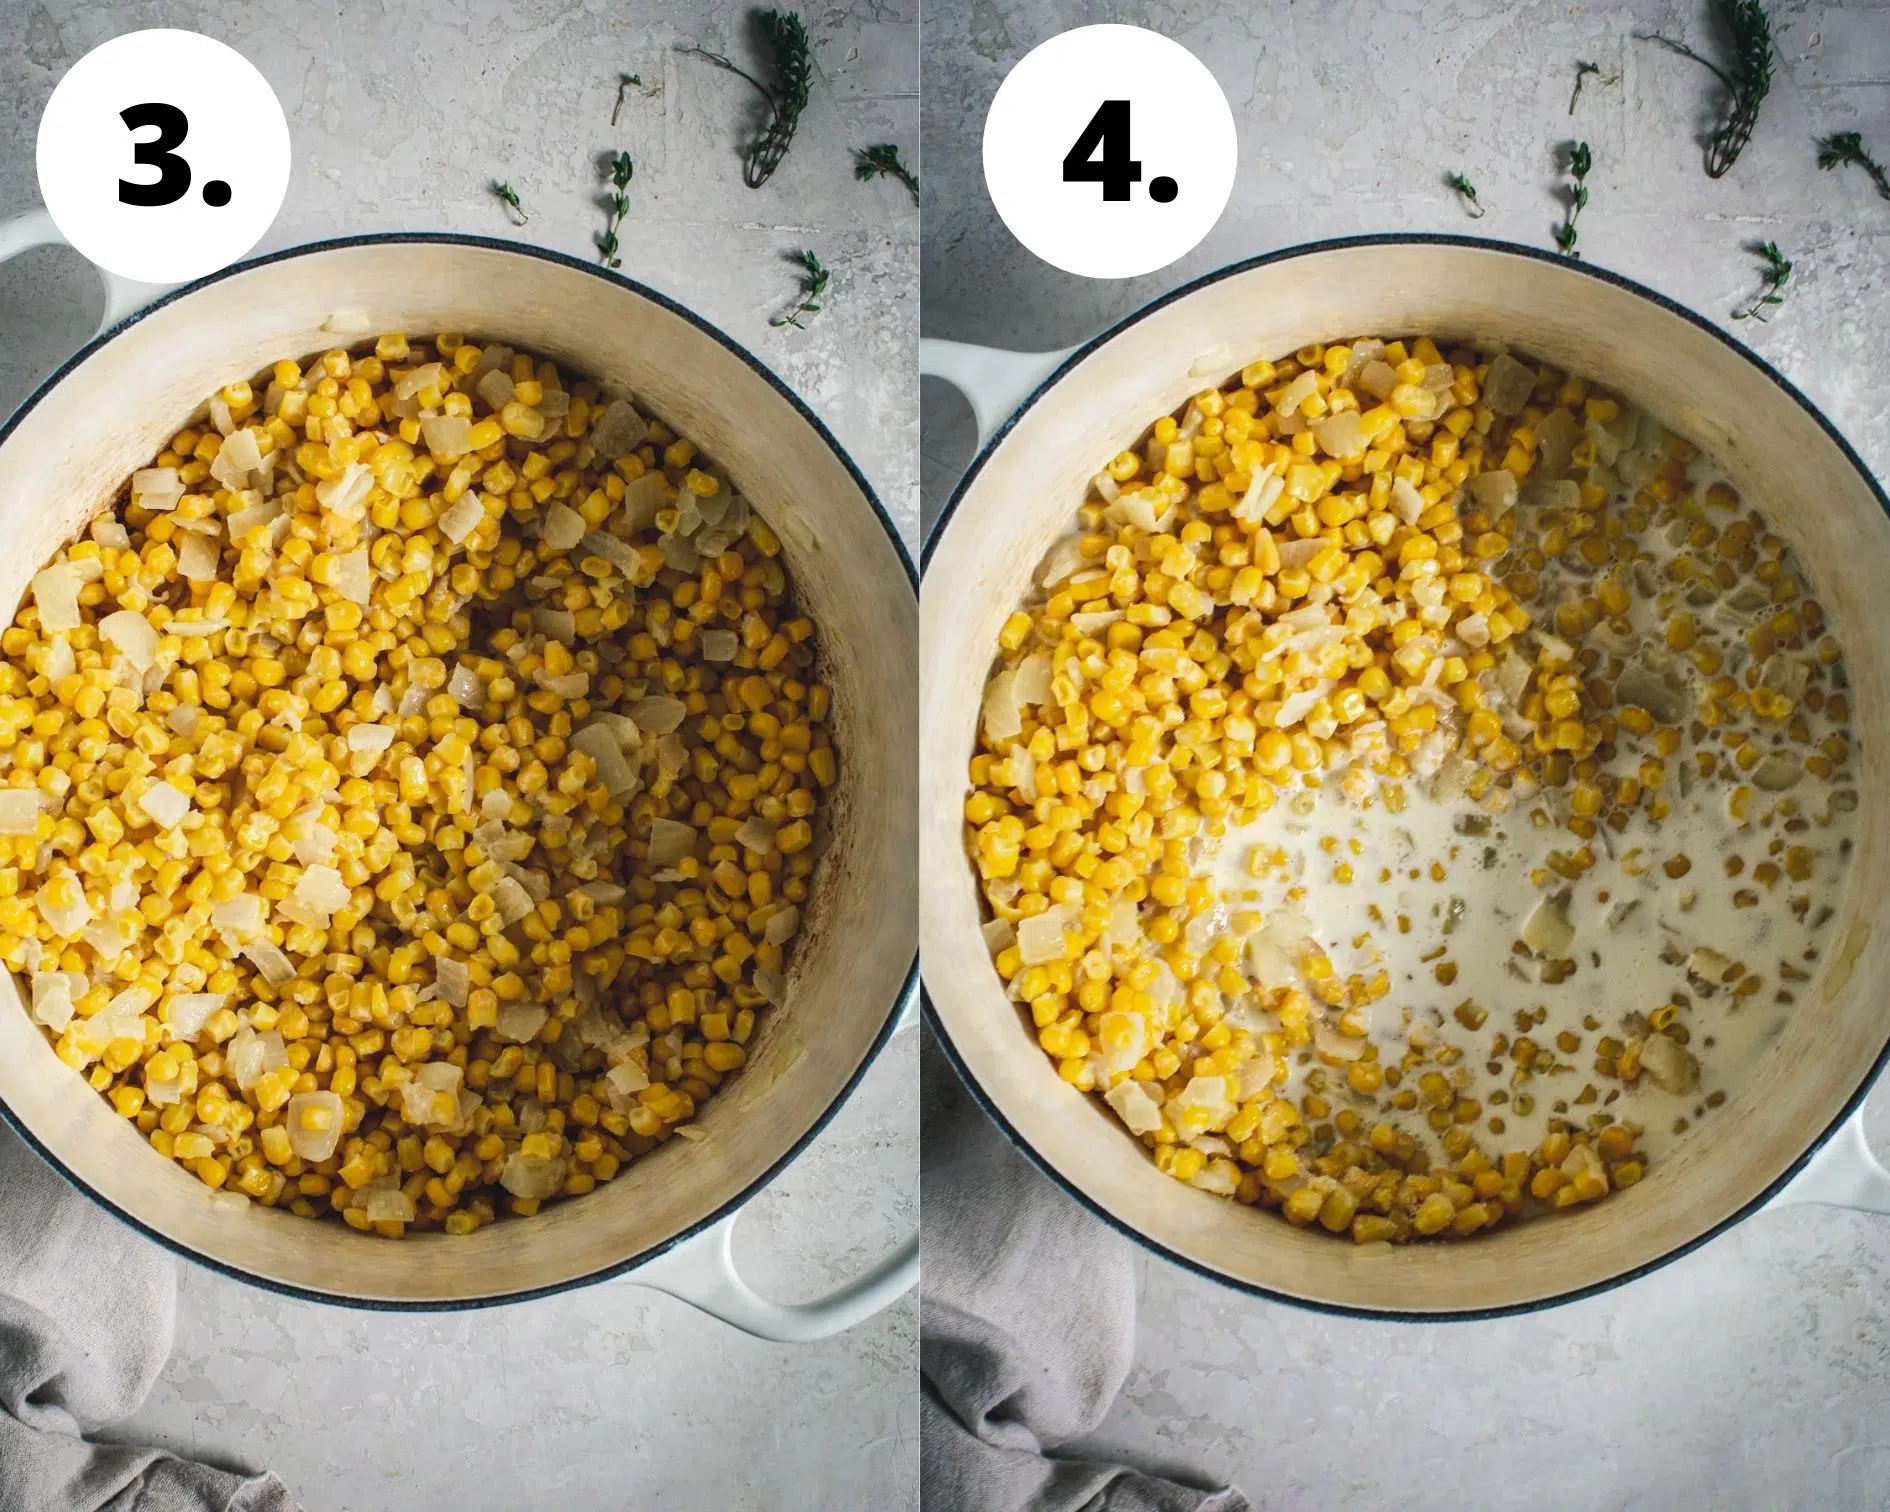 Best creamed corn process steps 3 and 4.